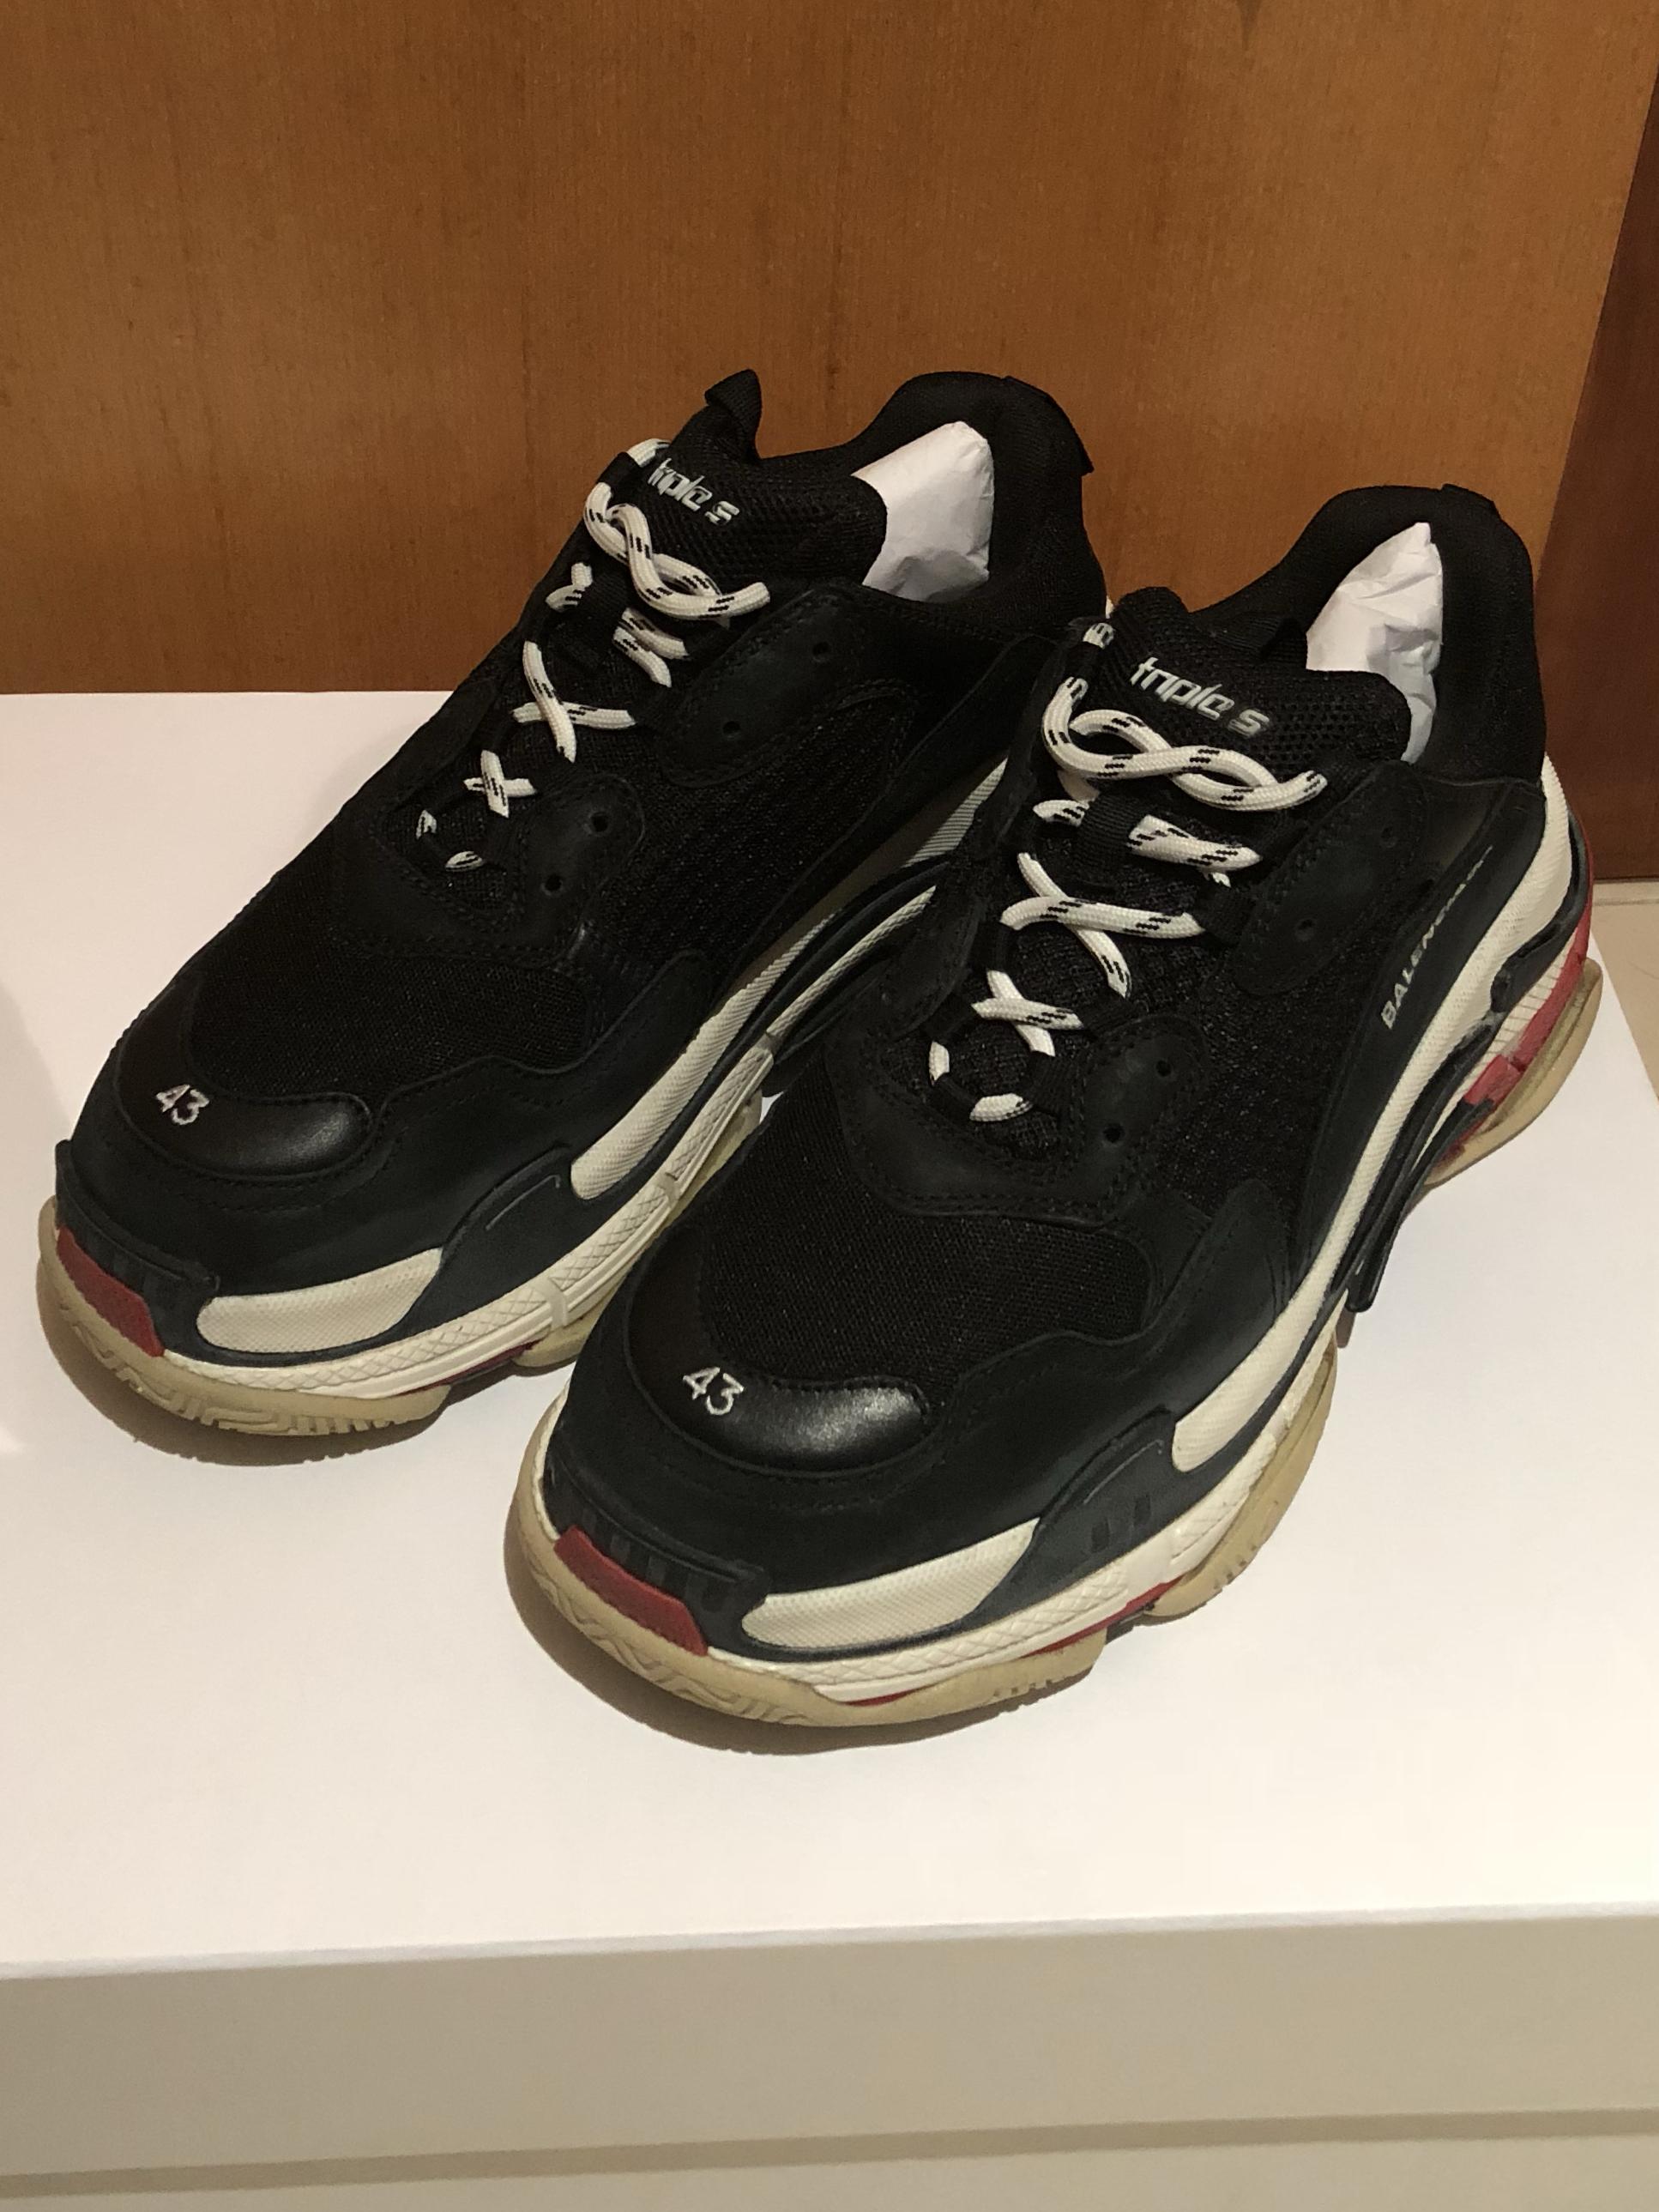 Balenciaga Black and red Triple S Sneakers £645 Shop